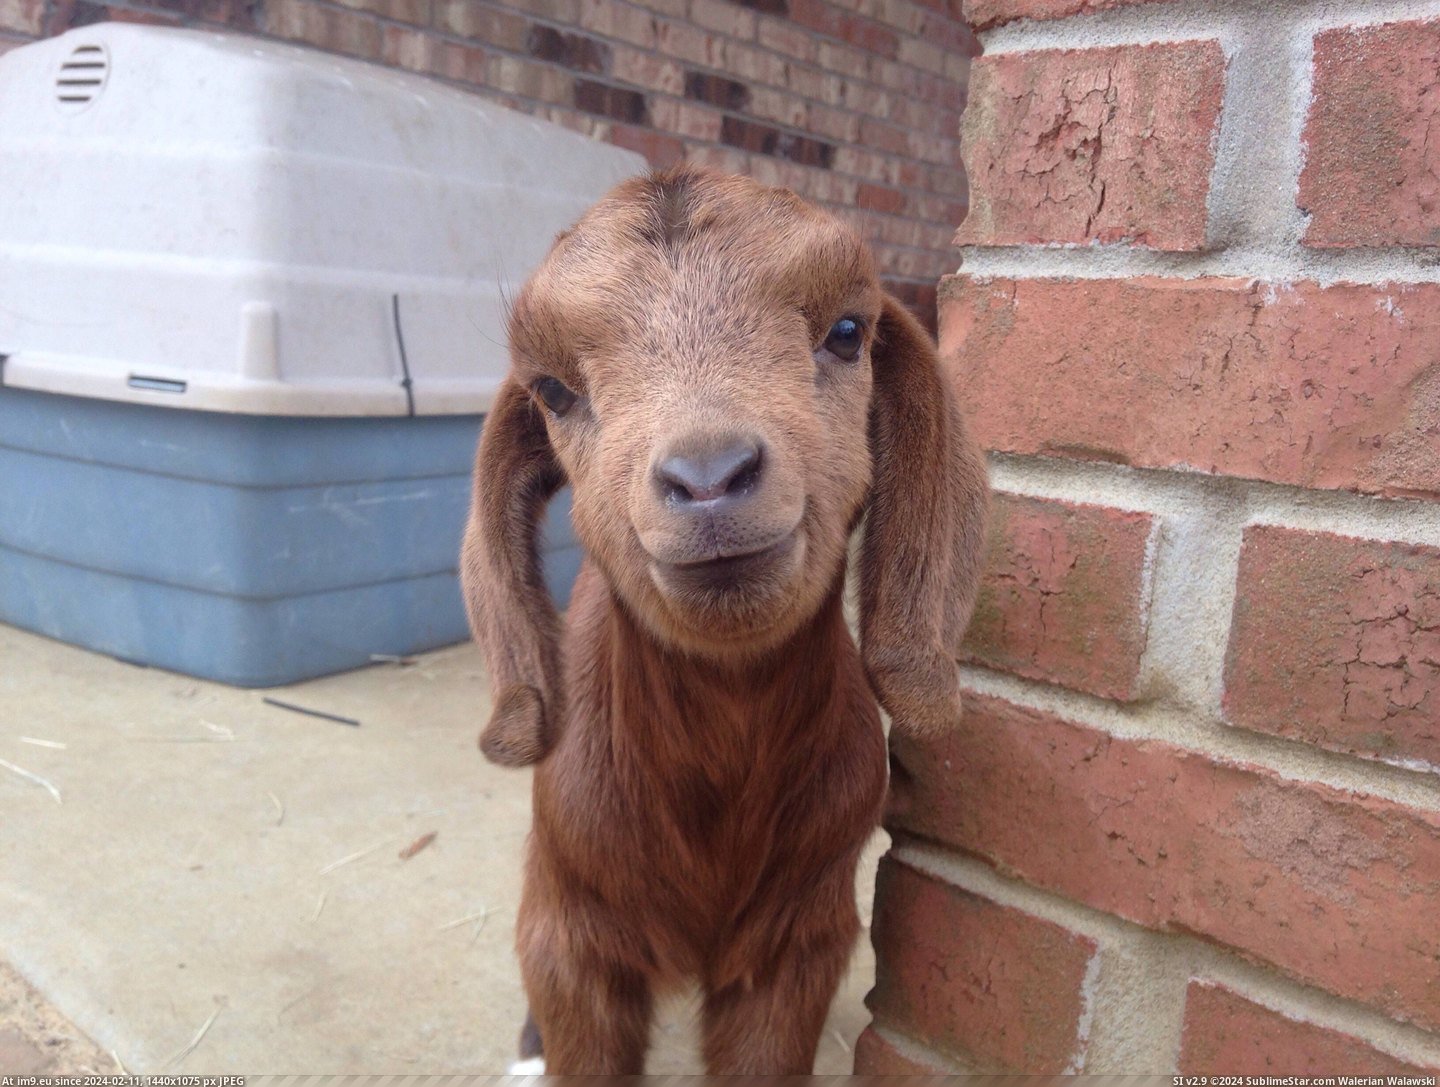 #Old #Fresh #Goat #Weeks [Aww] Fresh Goat, less than 2 weeks old Pic. (Image of album My r/AWW favs))